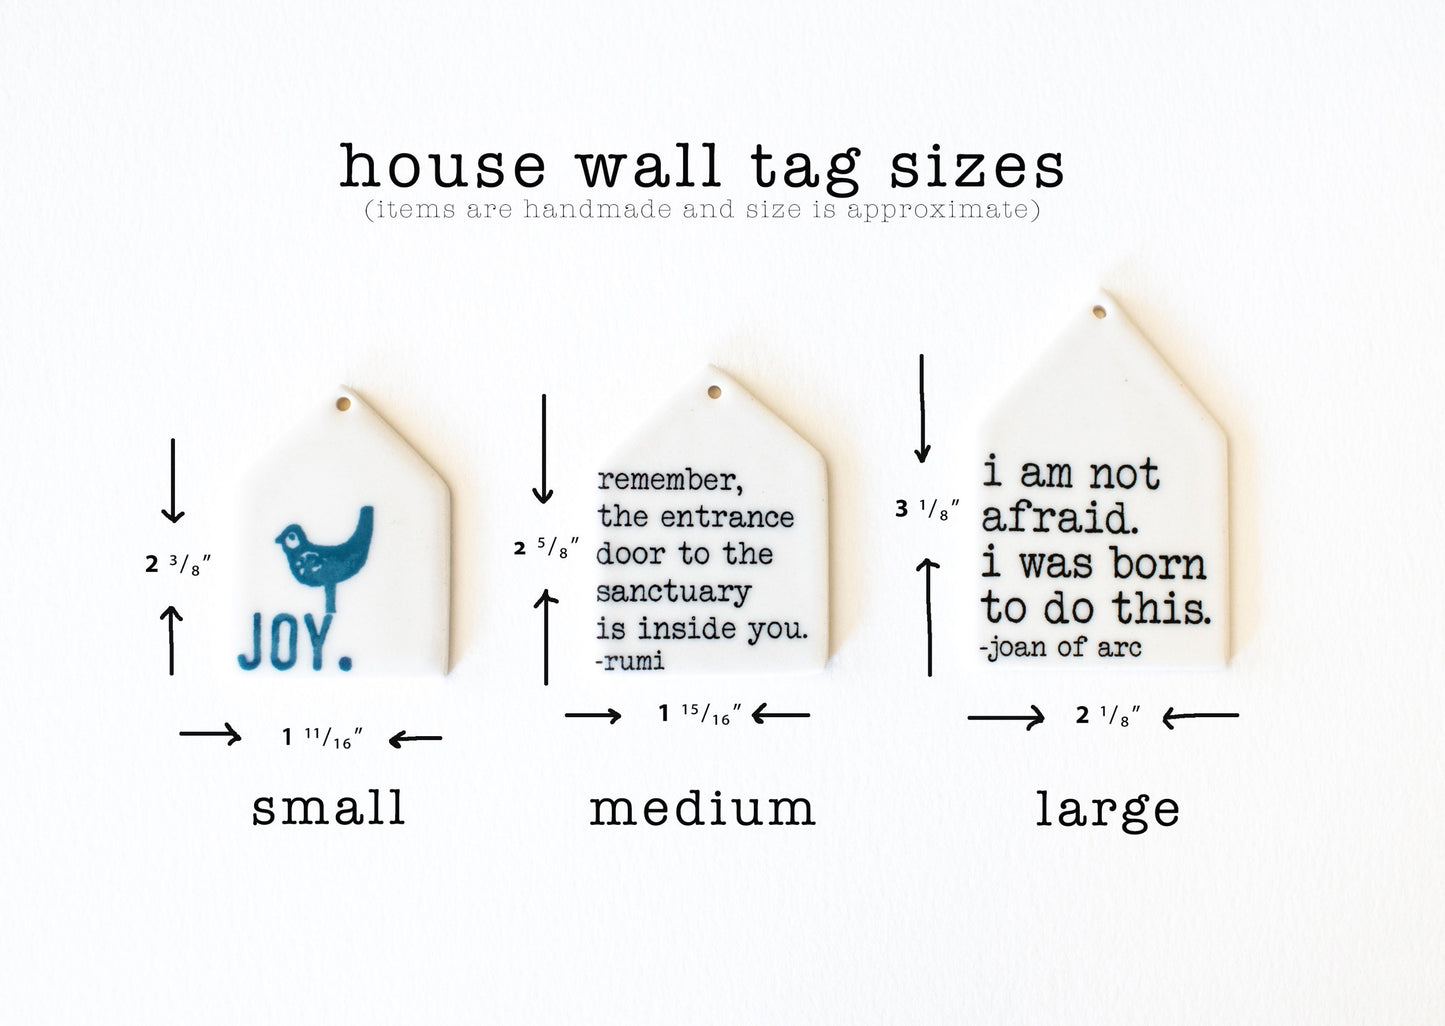 joy quote | ceramic wall tag | ceramic wall art | gift for friend | minimalist design | home decor | meaningful gift